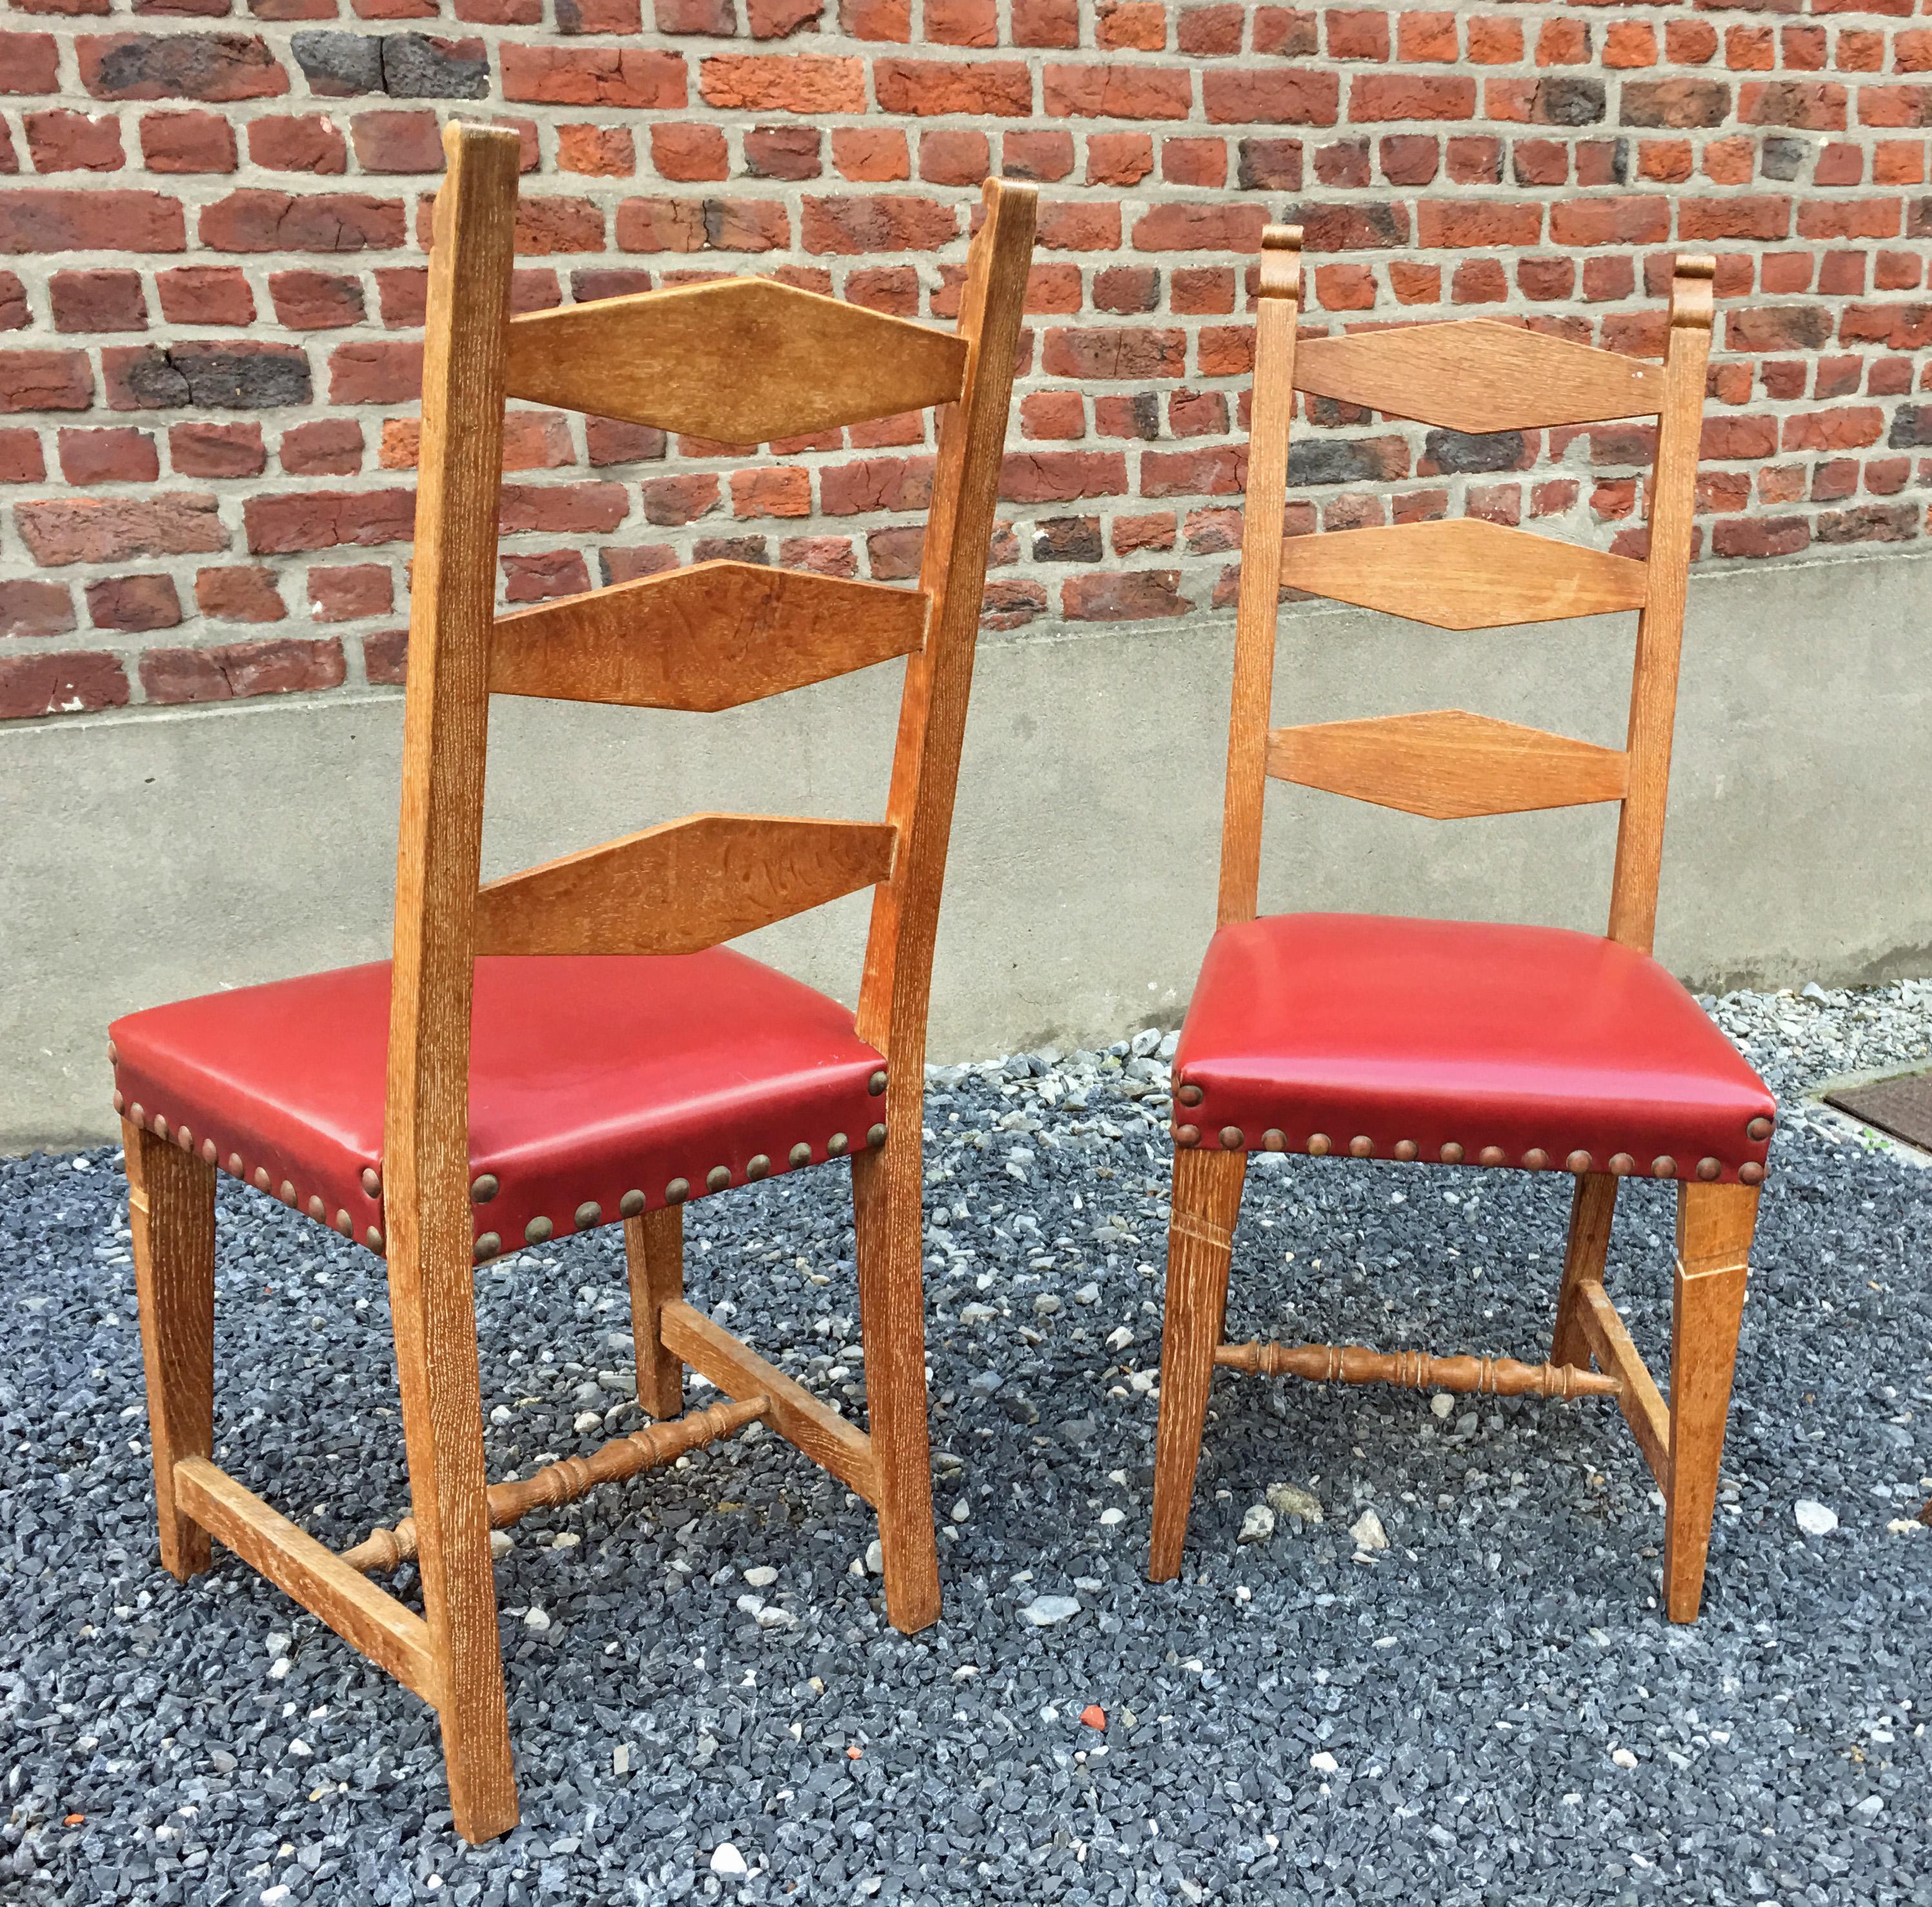 suite of 4 oak chairs, faux leather covering, circa 1950.